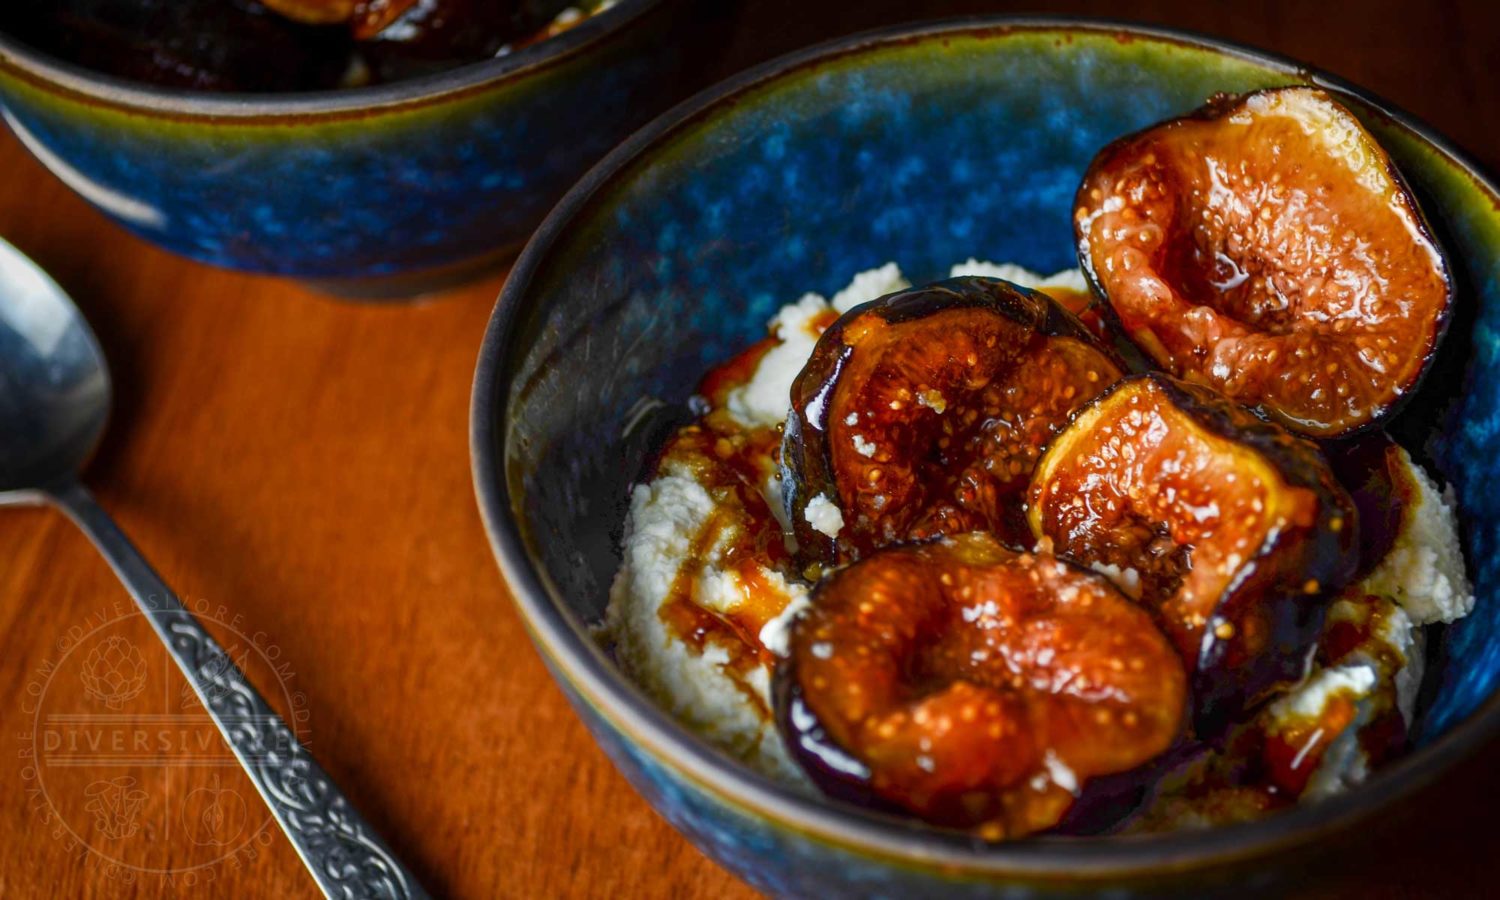 Figs with Ricotta and Whisky Caramel